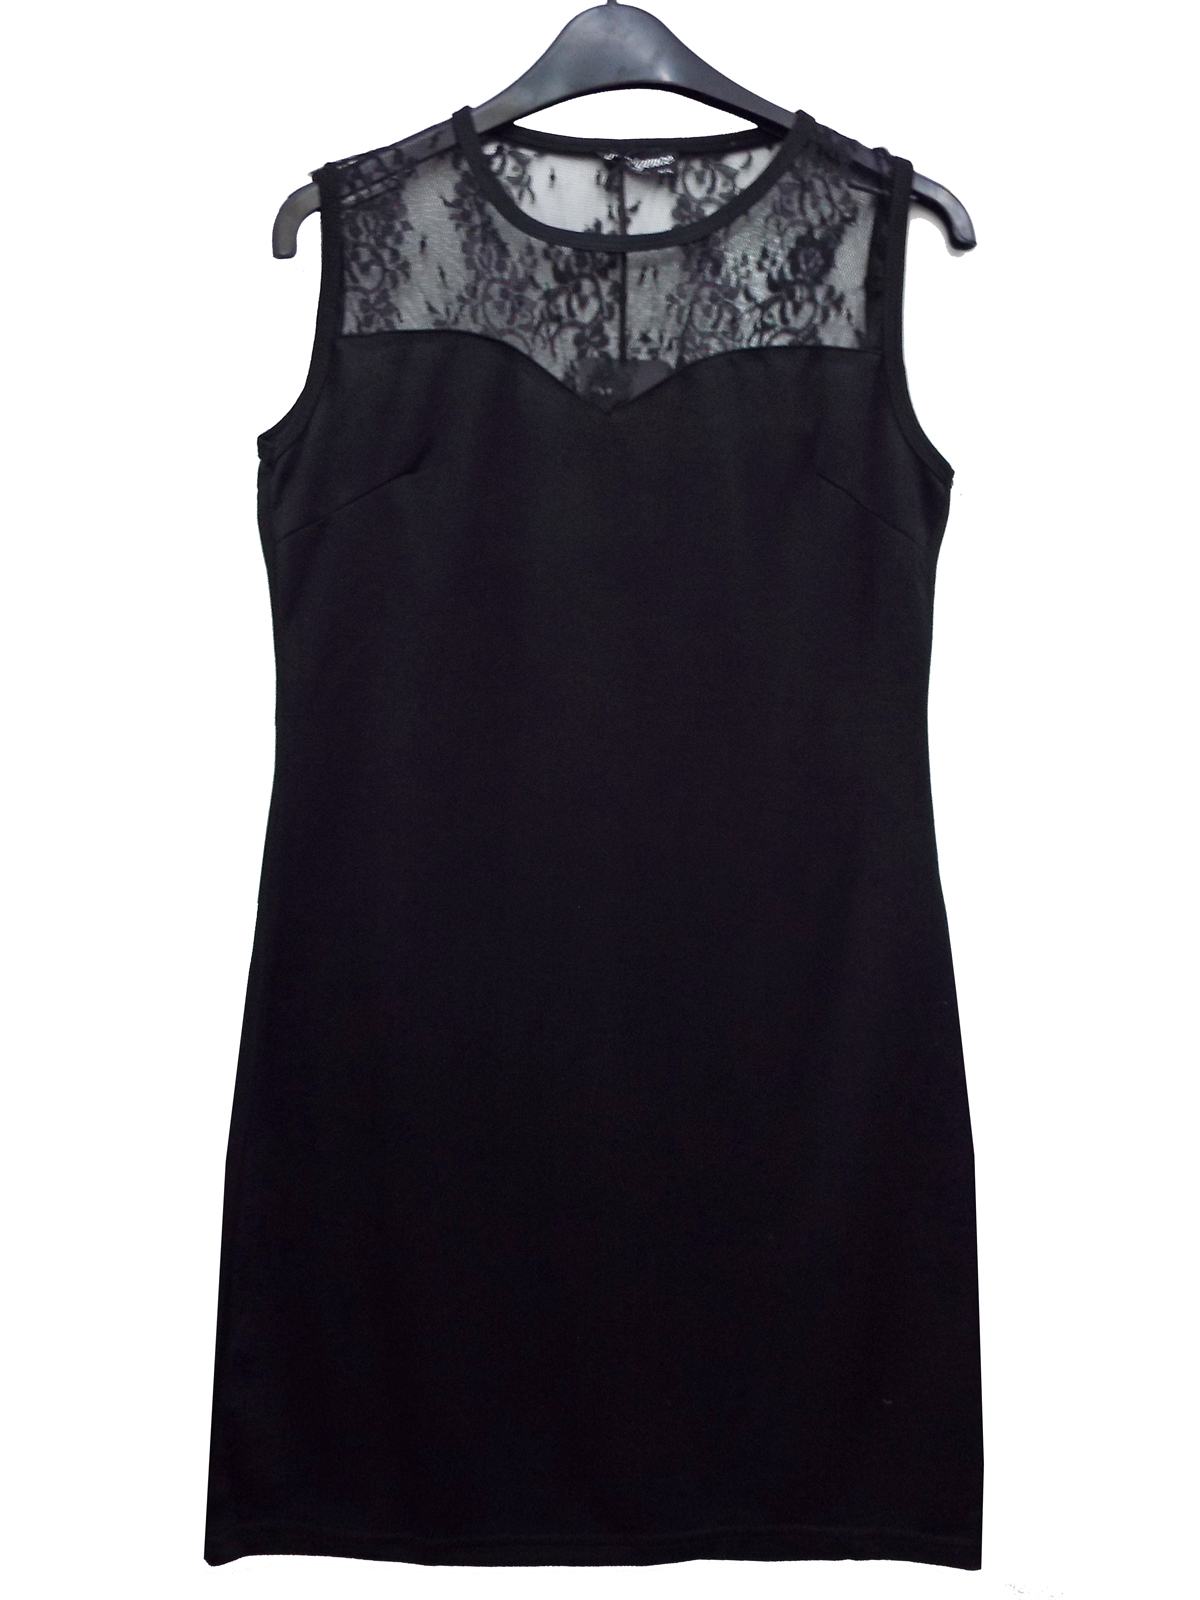 Indulgence London - - ASSORTED Summer Dresses - Size S/M to M/L and 8